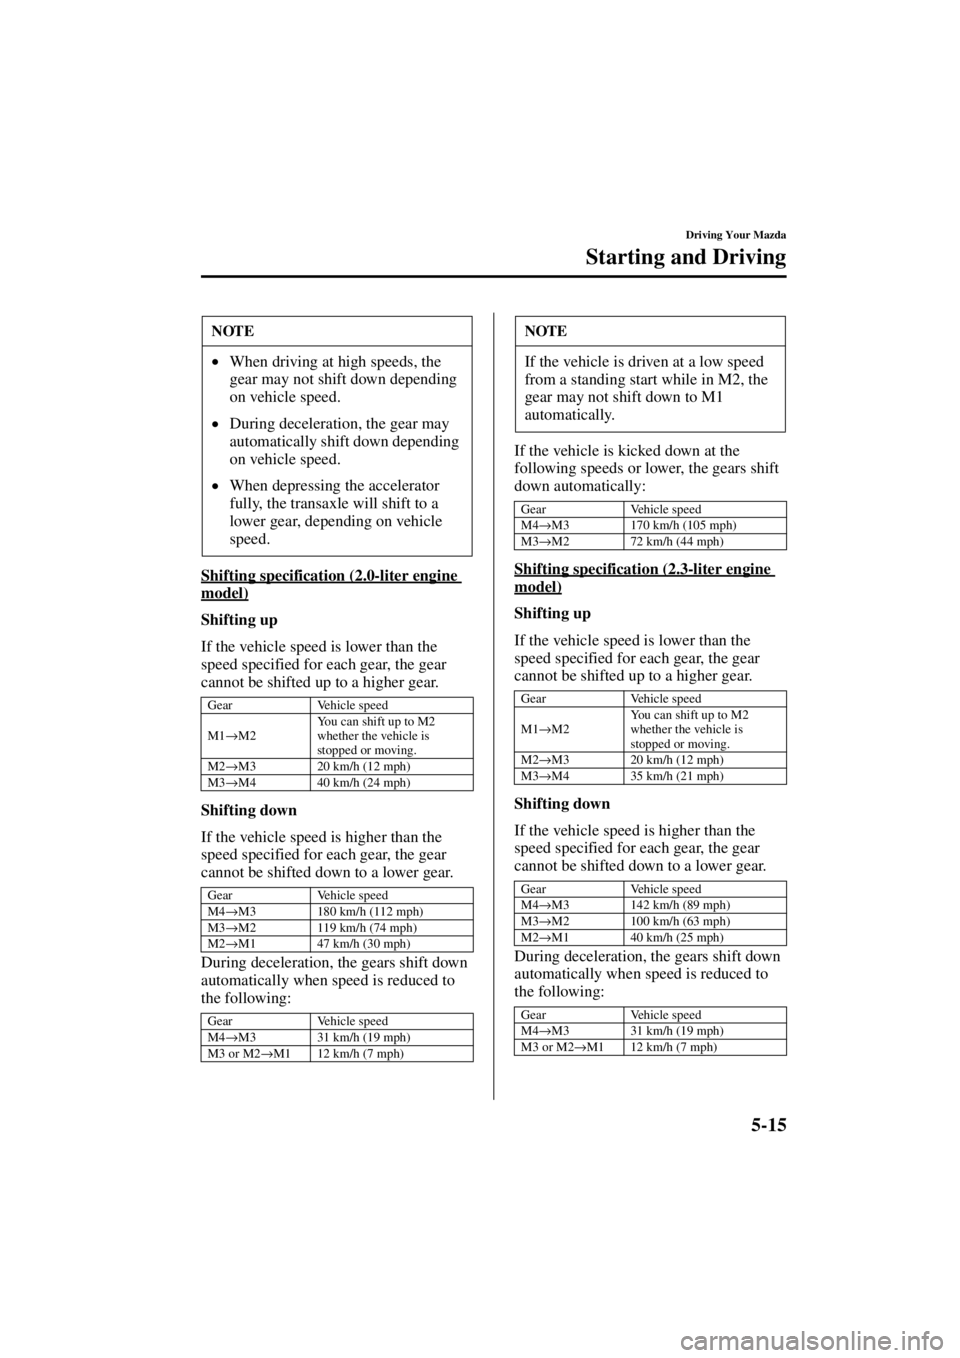 MAZDA MODEL 3 4-DOOR 2004 User Guide 5-15
Driving Your Mazda
Starting and Driving
Form No. 8S18-EA-03I
Shifting specification (2.0-liter engine 
model)
Shifting up
If the vehicle speed is lower than the 
speed specified for each gear, th